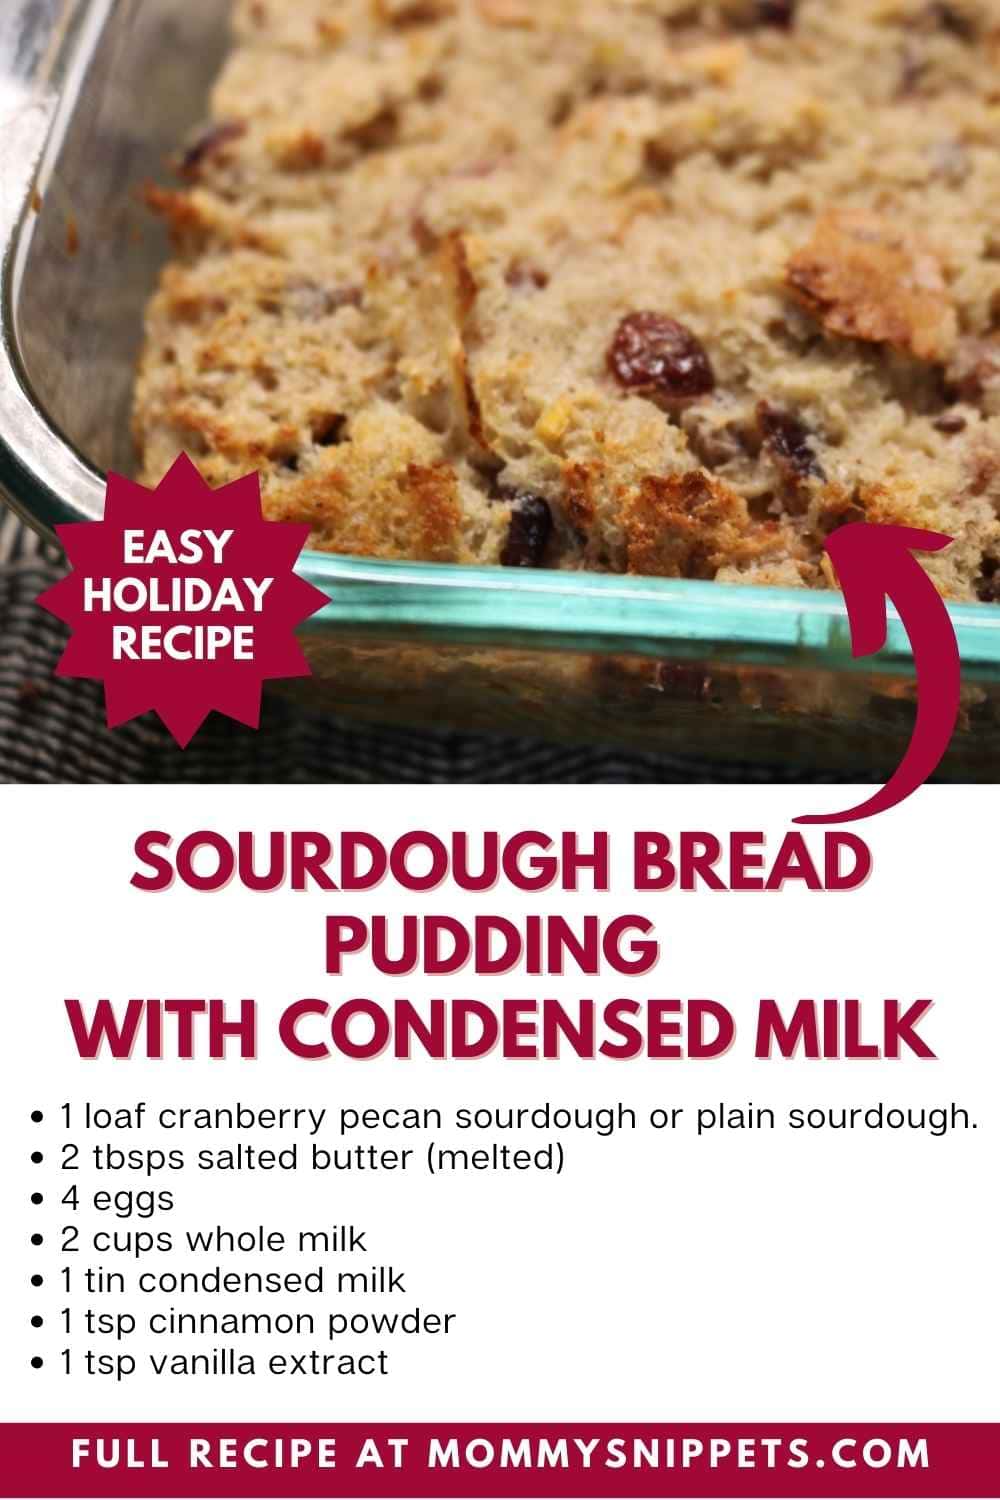 How to make Sourdough Bread Pudding With Condensed Milk - an Easy Holiday Recipe 